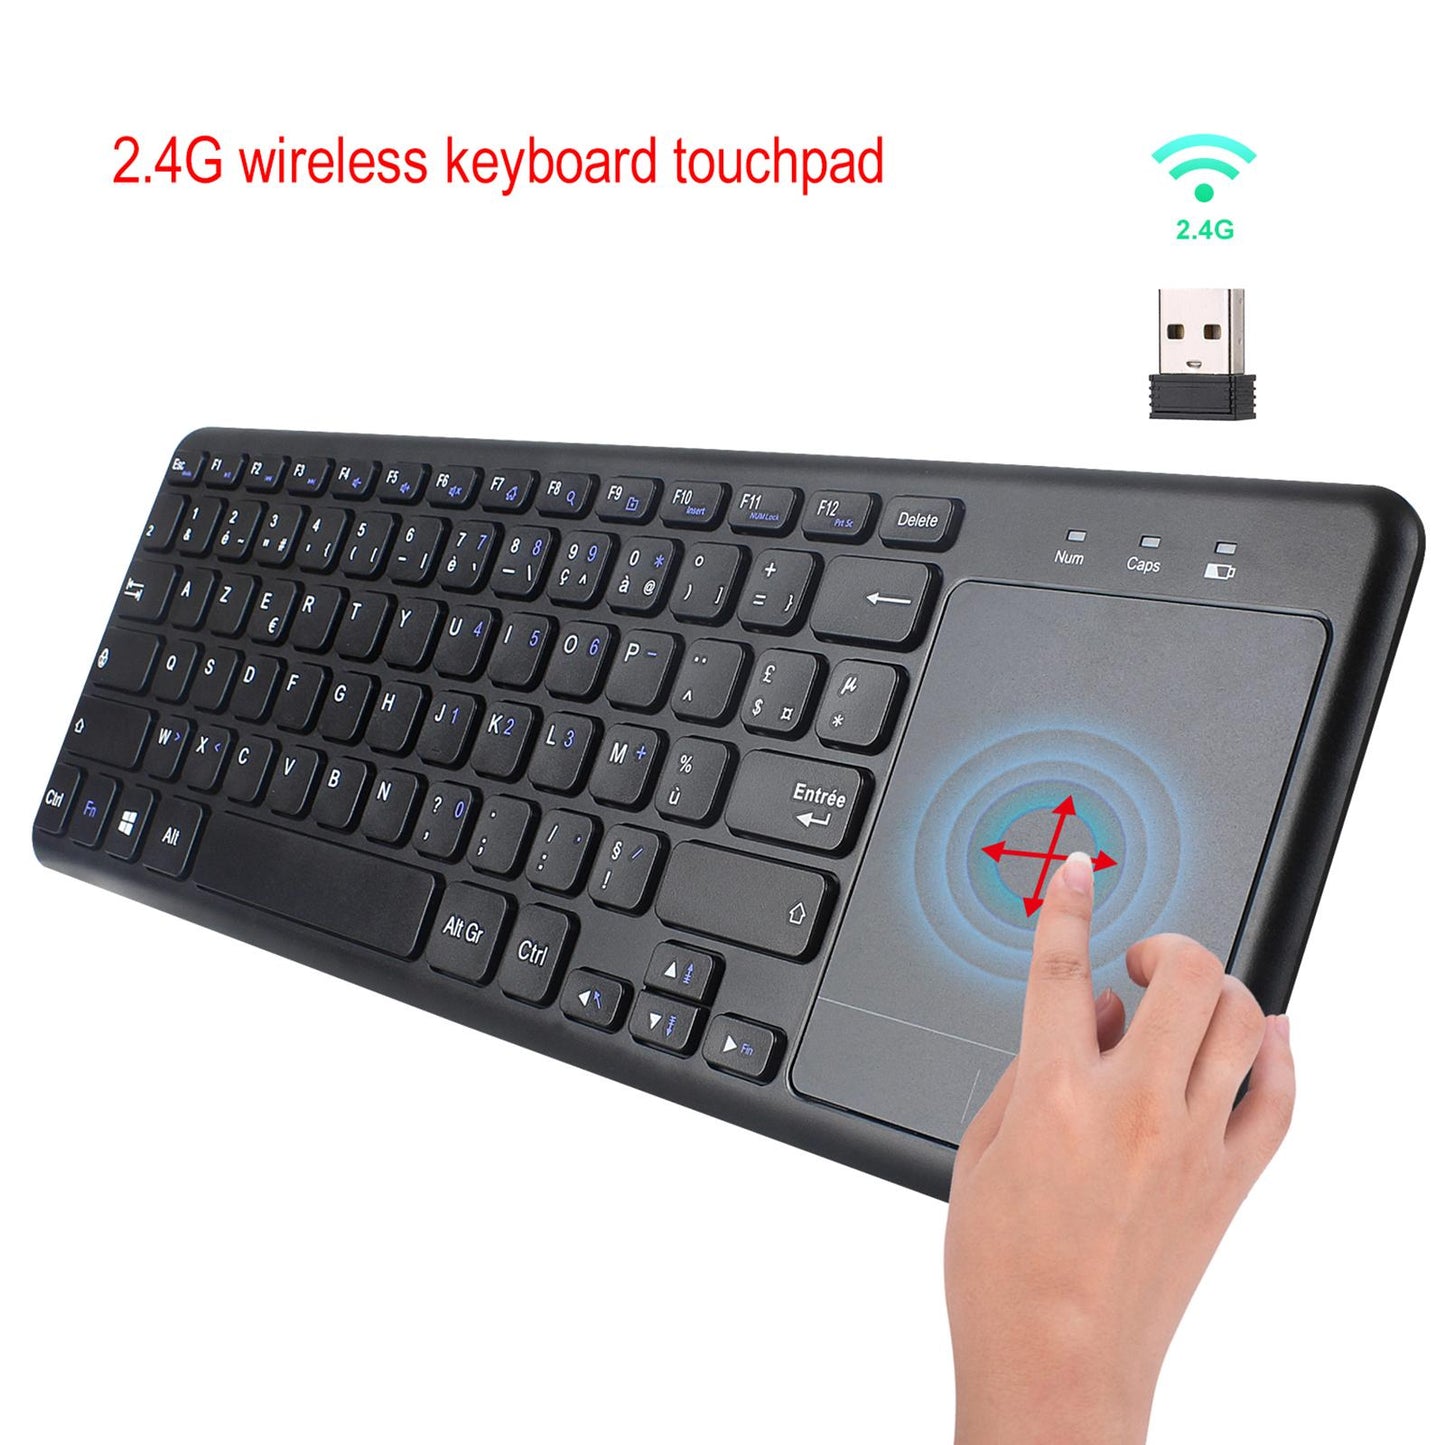 2.4G Wireless Keyboard Built-In Touchpad Mouse Trackpad for Tablet Windows